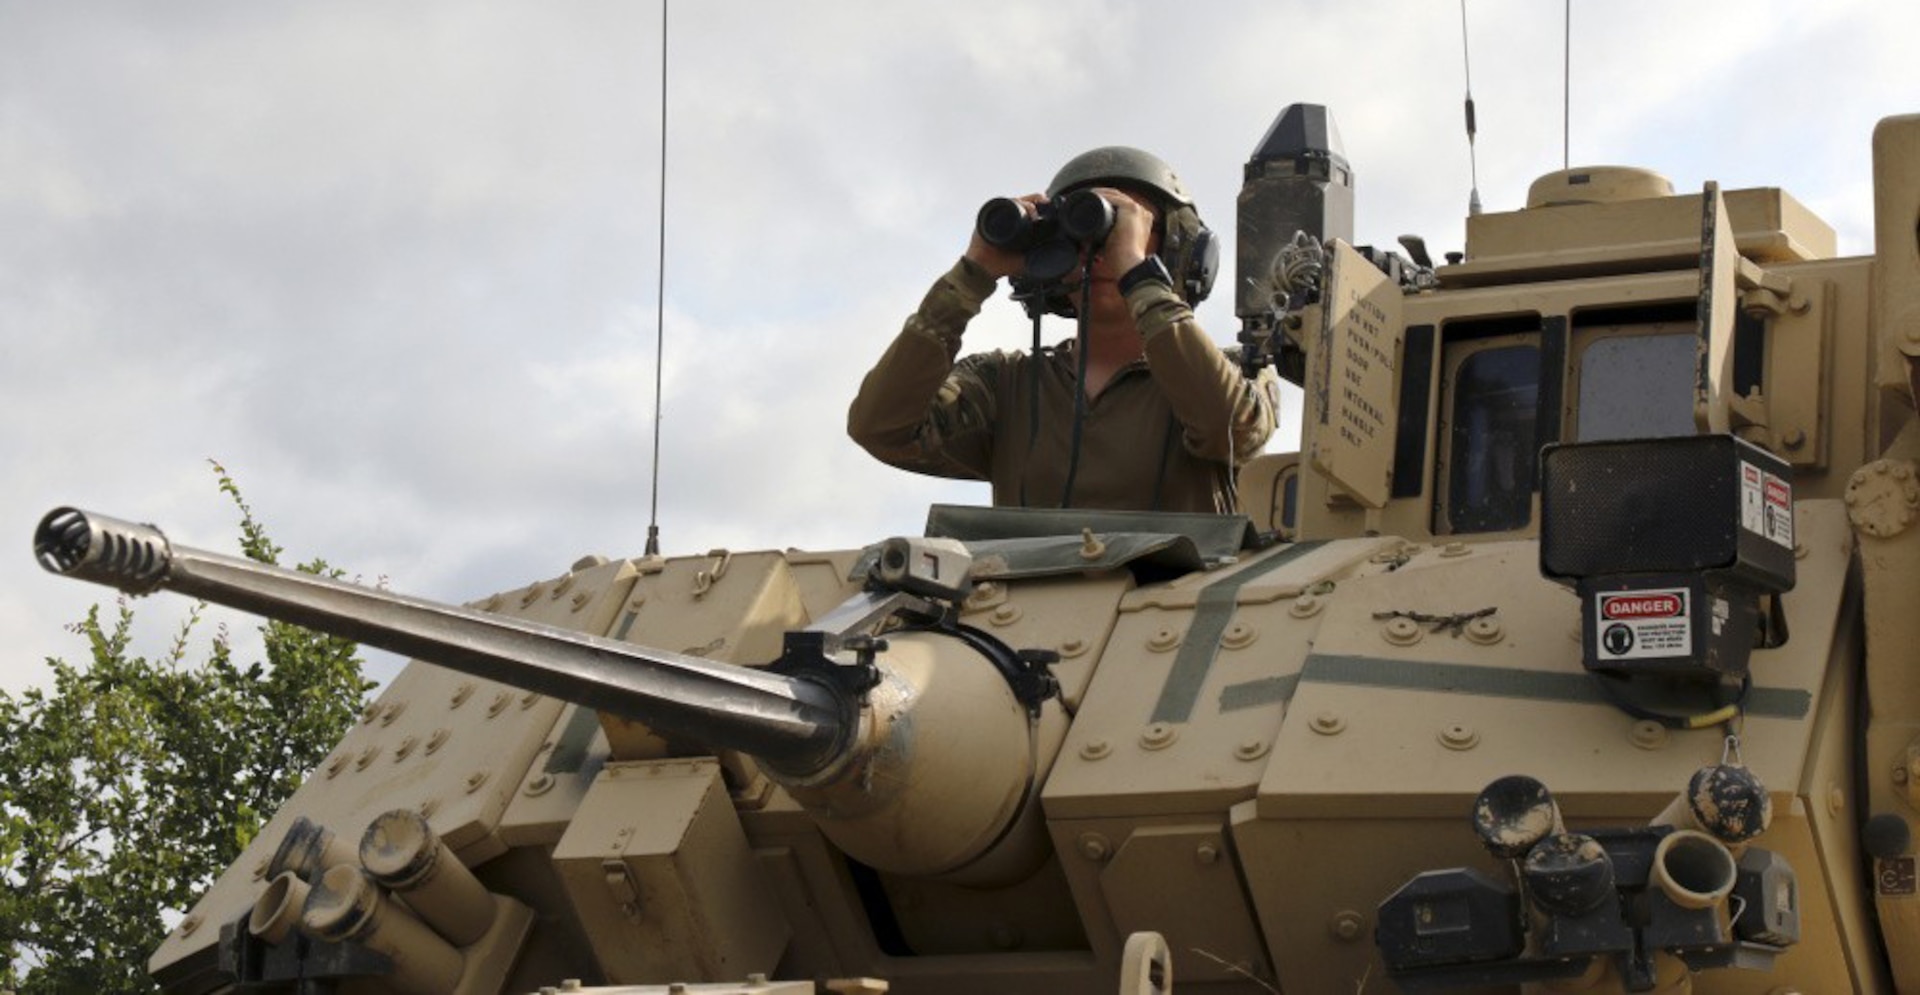 A Tennessee Army National Guardsman scans for enemy movement during XCTC 21-03 at Fort Hood, Texas. The 174th Infantry Brigade partnered with the Tennessee Army National Guard’s 278th Armored Cavalry Regiment for the 14-day exportable combat training capability exercise.